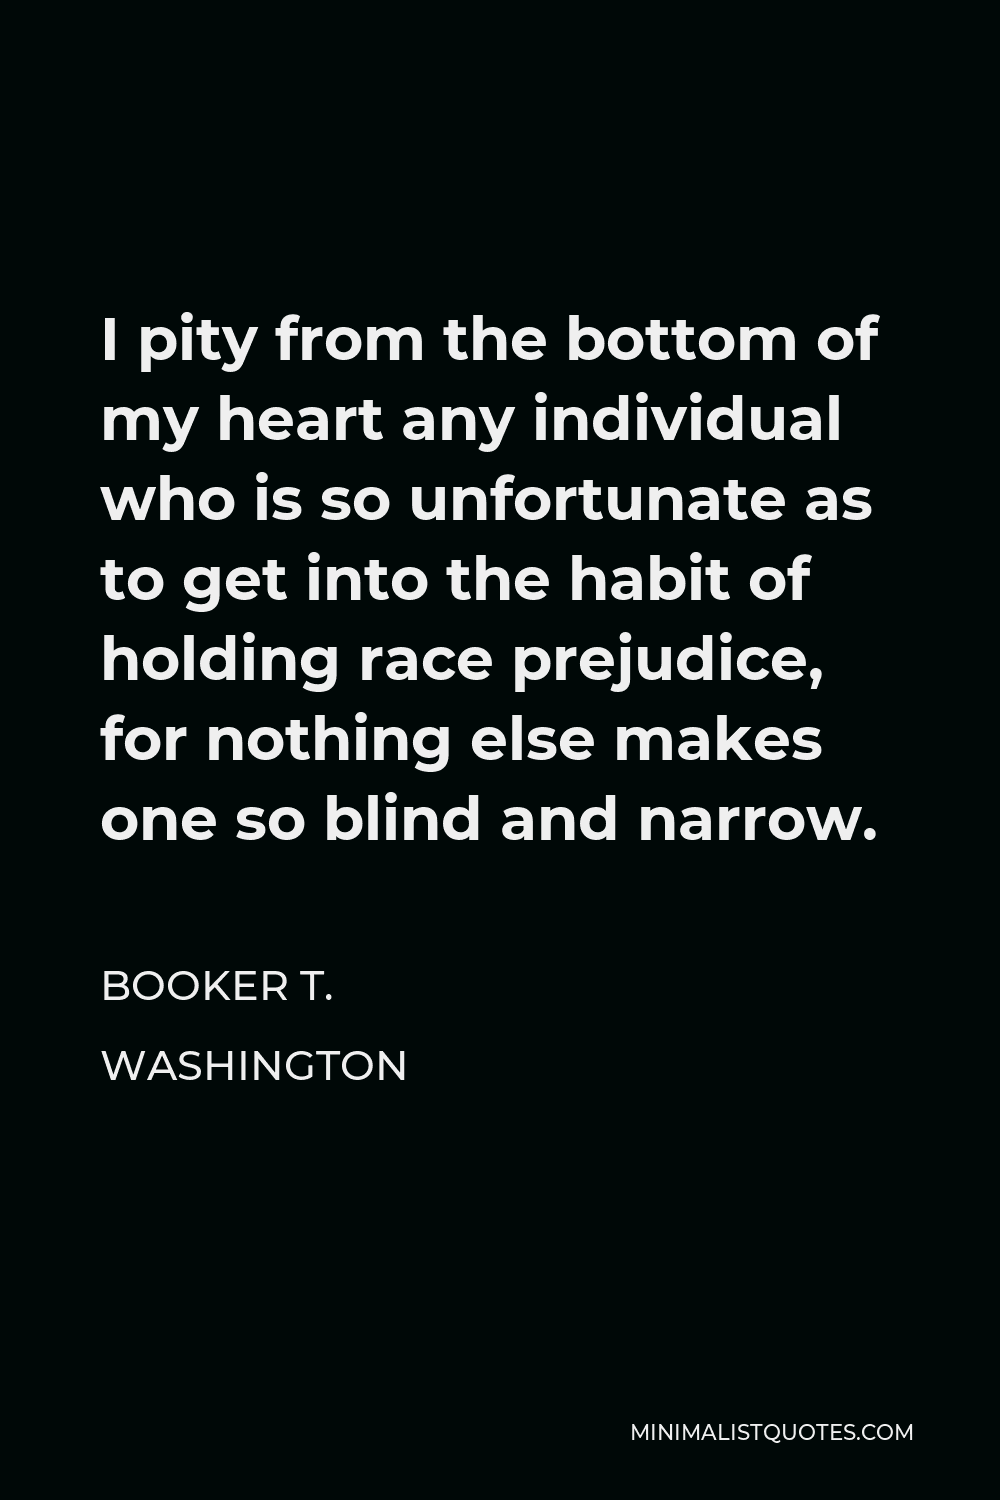 Booker T. Washington Quote - I pity from the bottom of my heart any individual who is so unfortunate as to get into the habit of holding race prejudice, for nothing else makes one so blind and narrow.